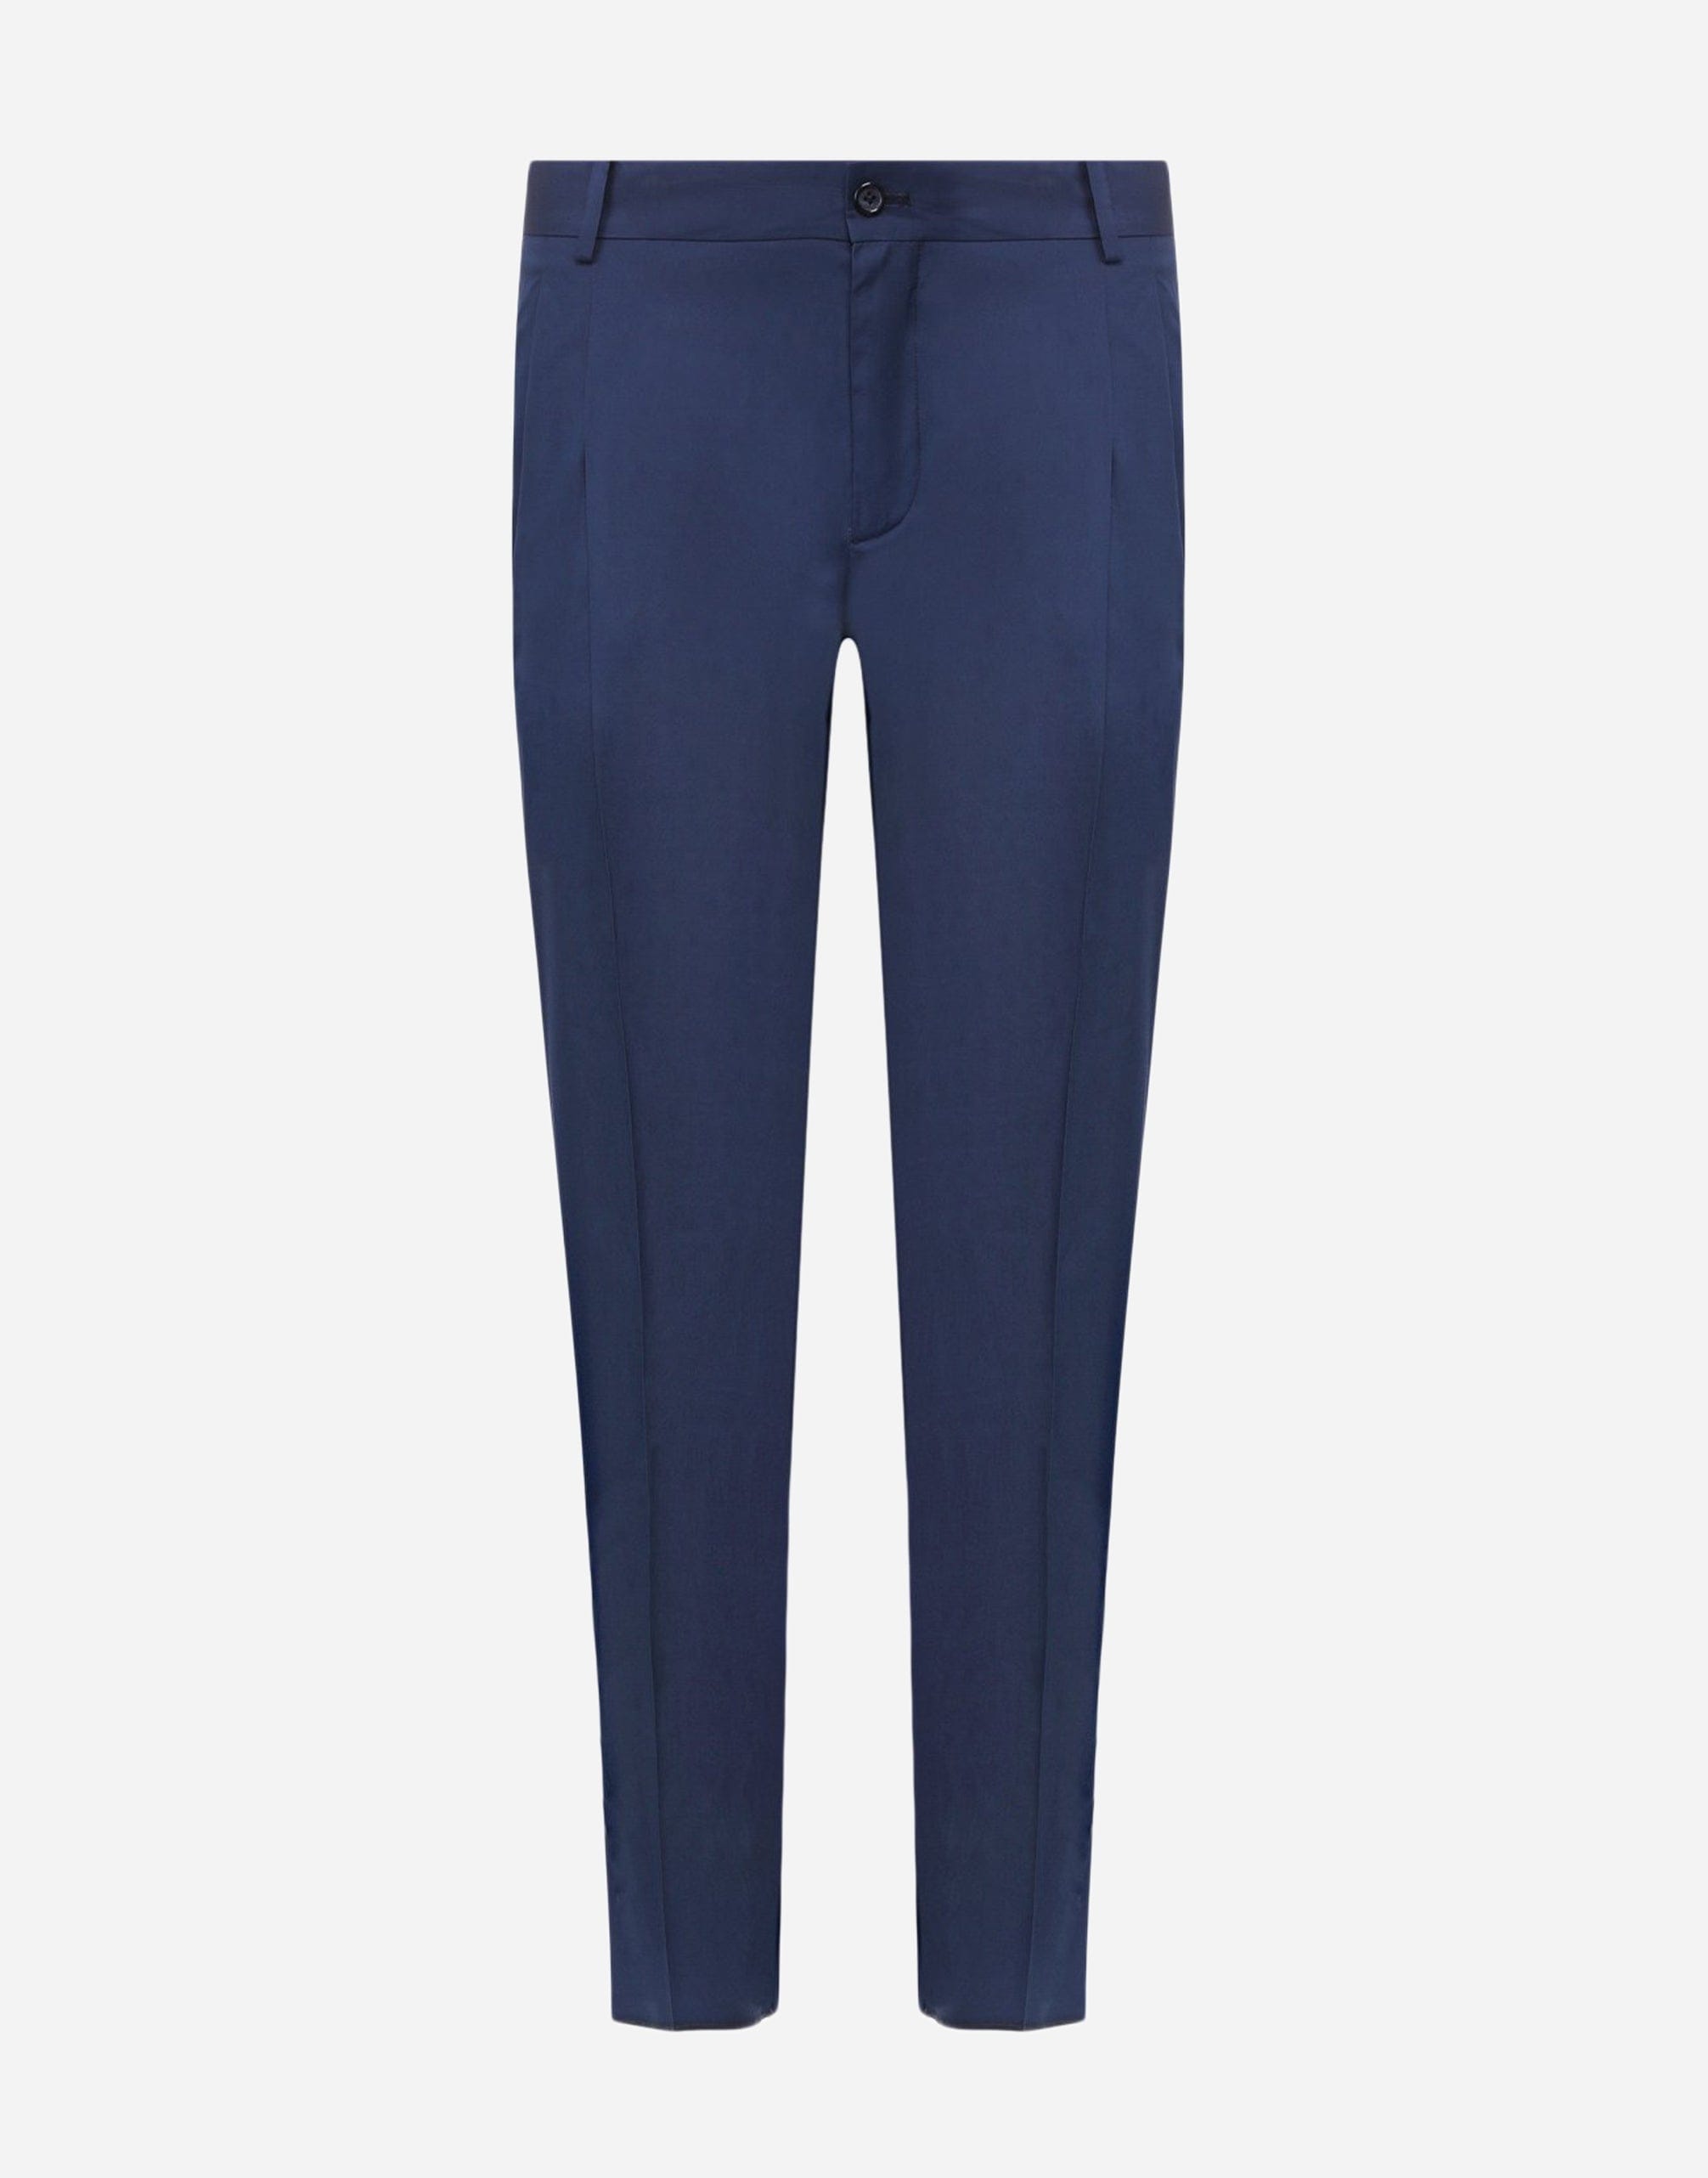 Dolce & Gabbana Slim-Fit Pants With Ruffles